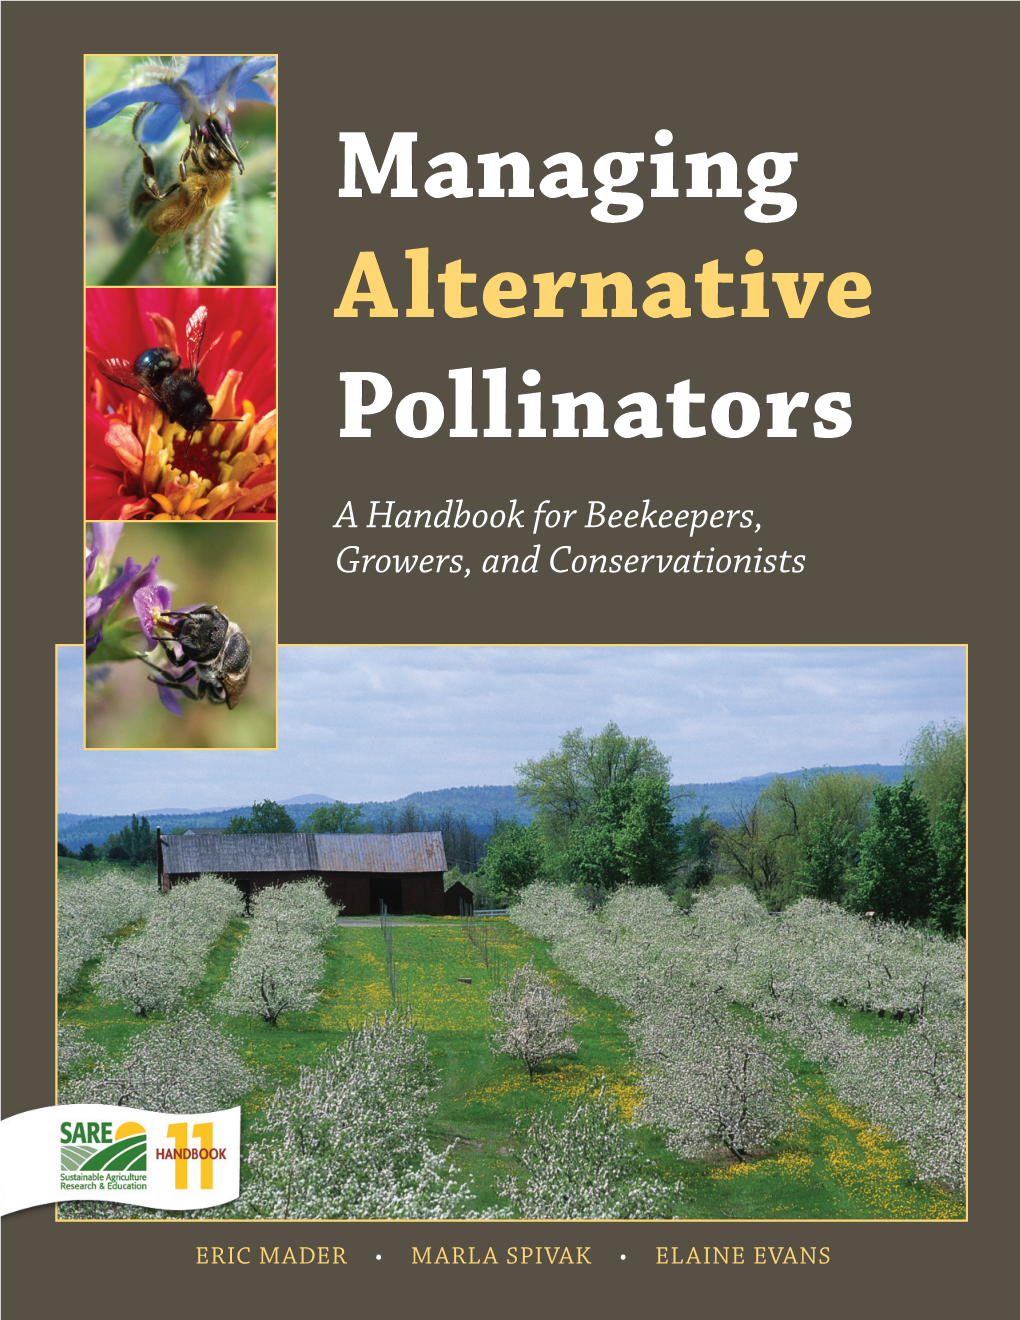 Managing Alternative Pollinators a Handbook for Beekeepers, Growers, and Conservationists